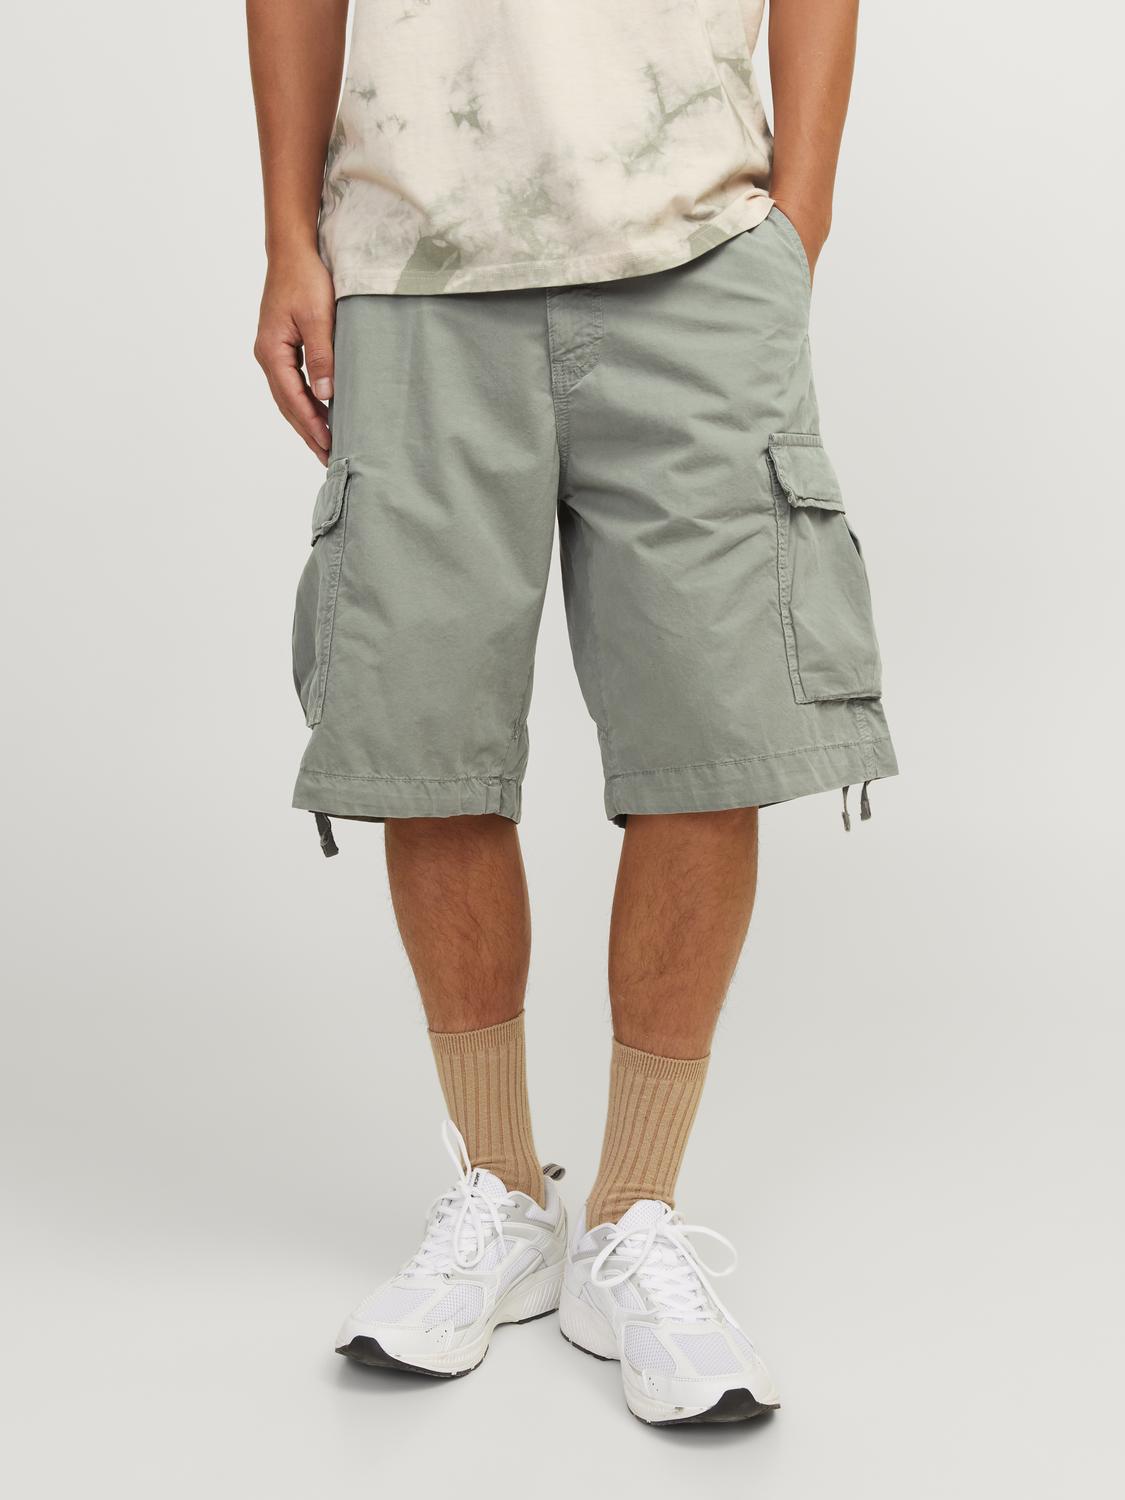 JPSTCOLE Shorts - Agave Green